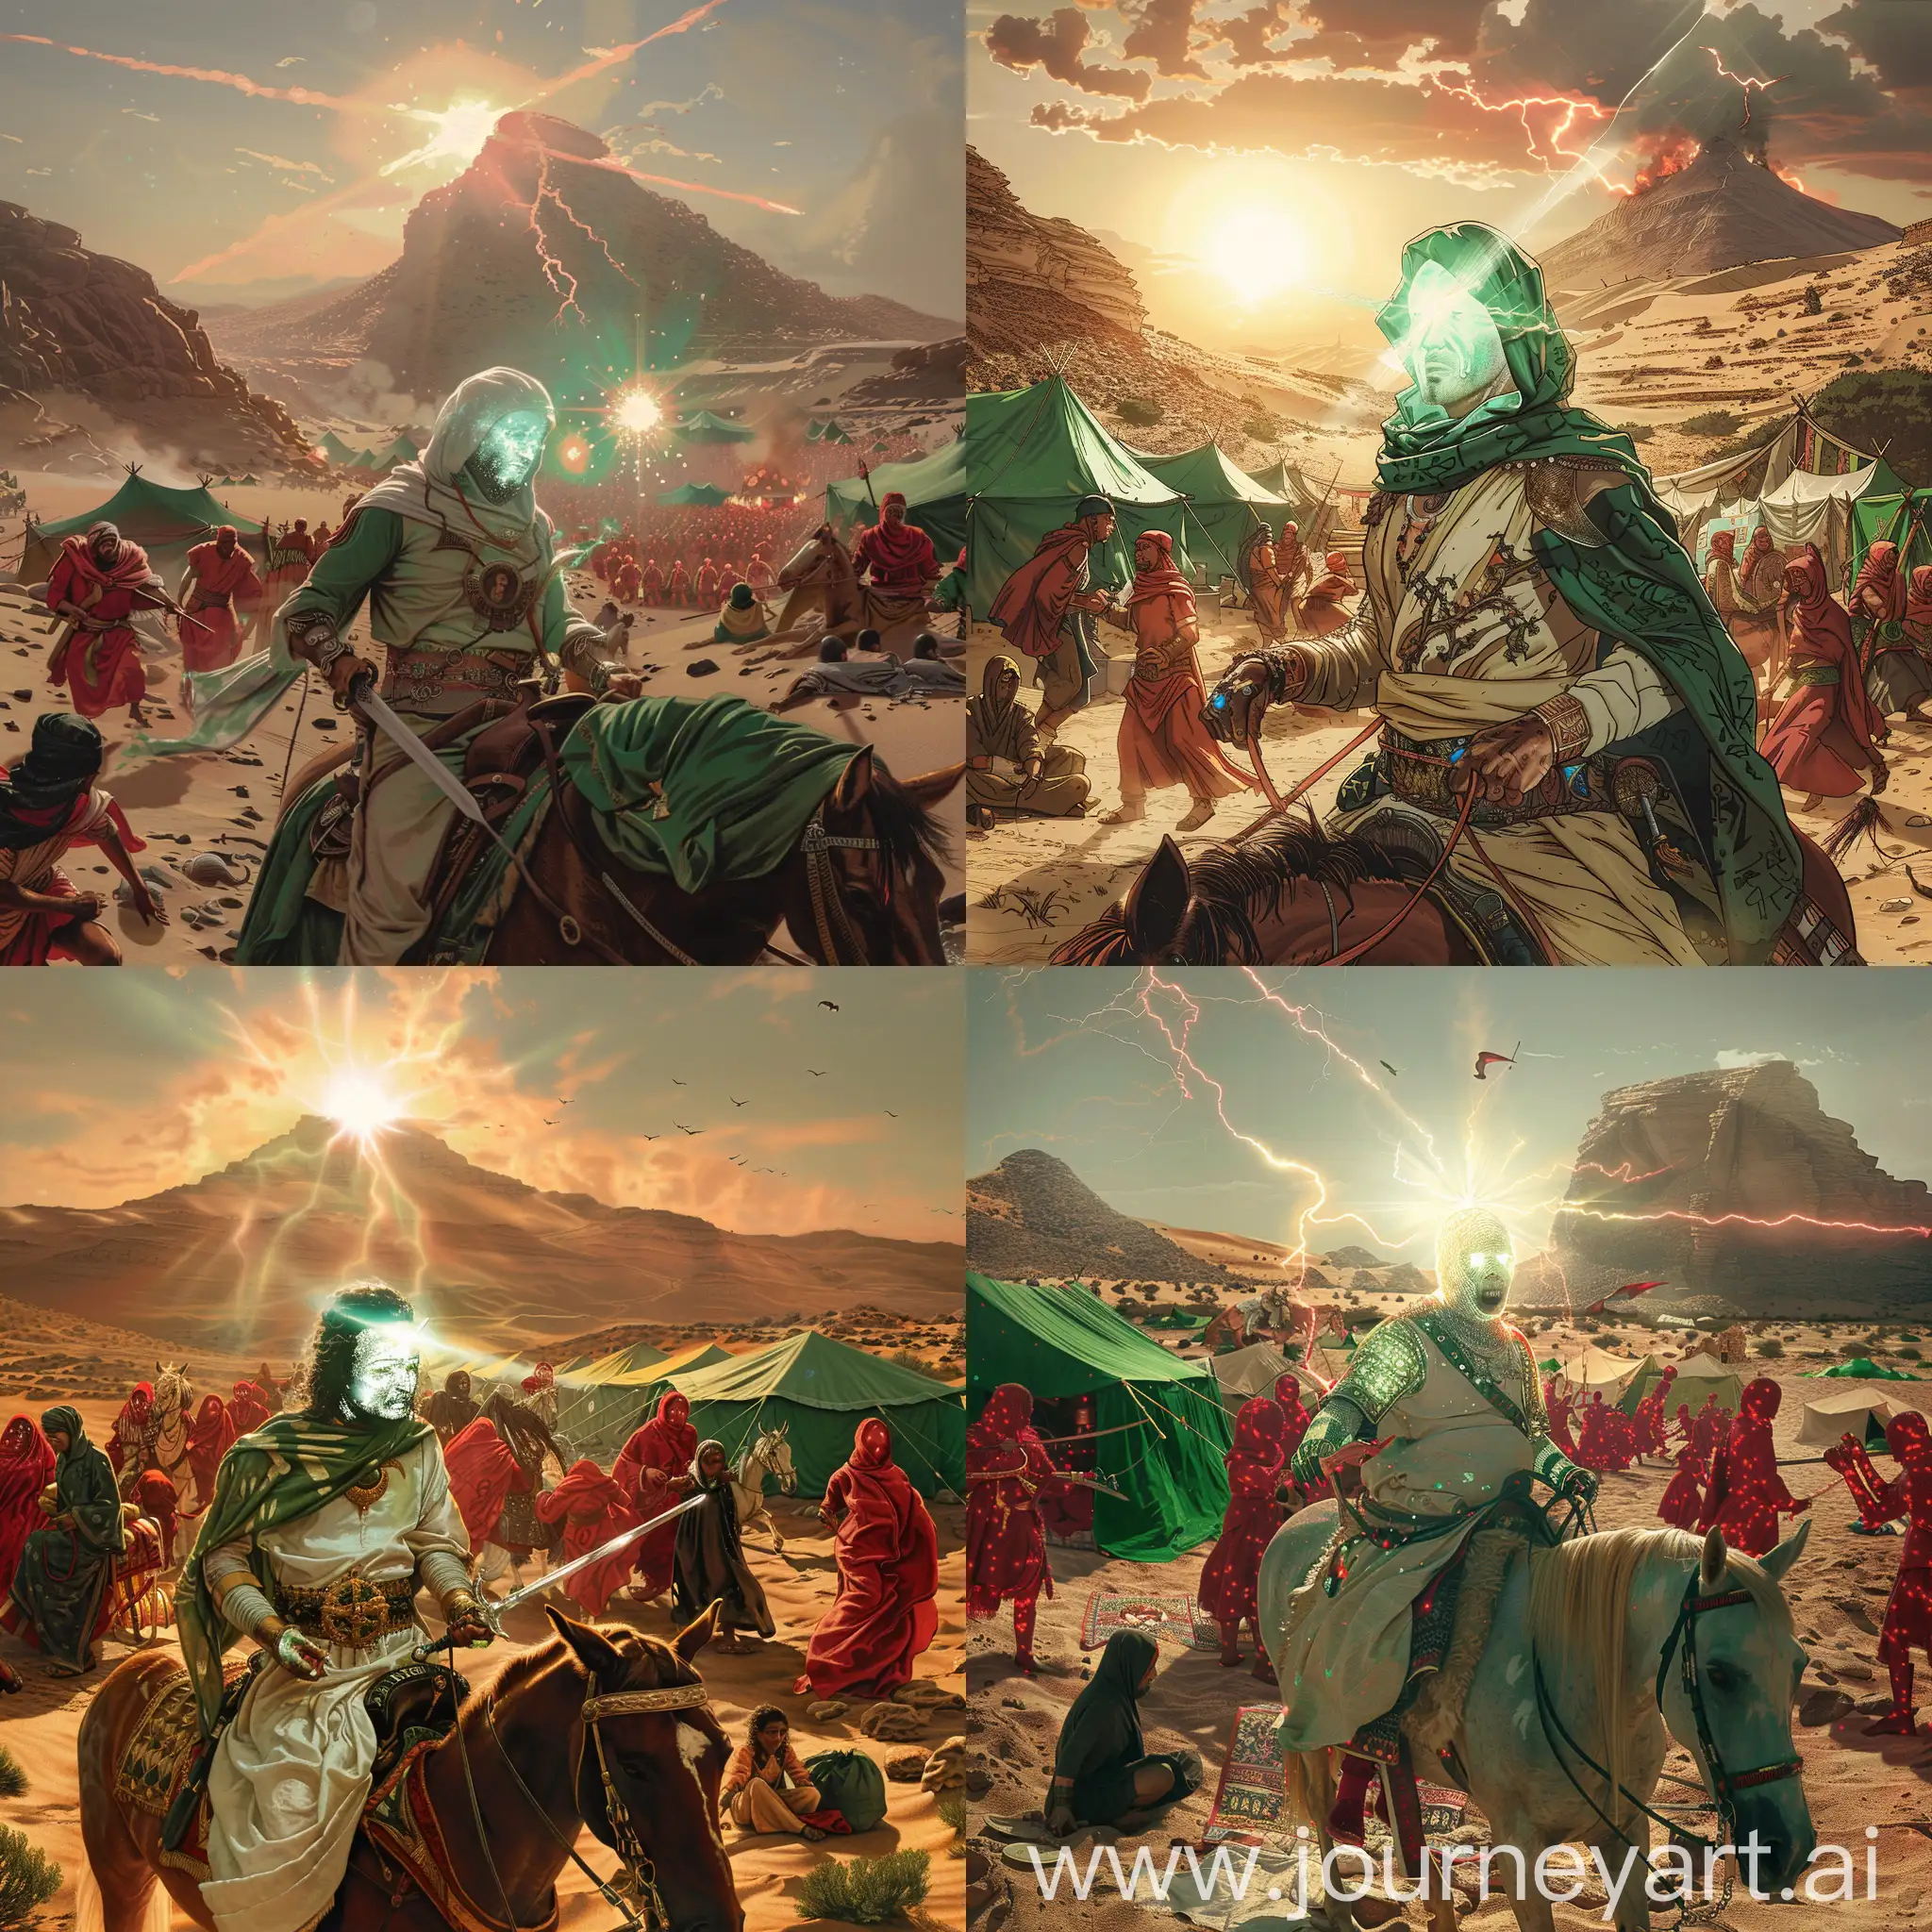 Take a picture of a desert during the day, where the sun is shining, and in which a man with a luminous face, so that his face is not clear due to the light, is wearing green and white clothes, sitting on a horse and holding a sword.  And he is protecting his family against enemies, his enemies are wearing red clothes, his enemies are an army with red war clothes and they are attacking him from all sides, and a mountain can be seen in the background and some green tents in this  There is a desert and next to these tents there are some women wearing black tents and there are some children there